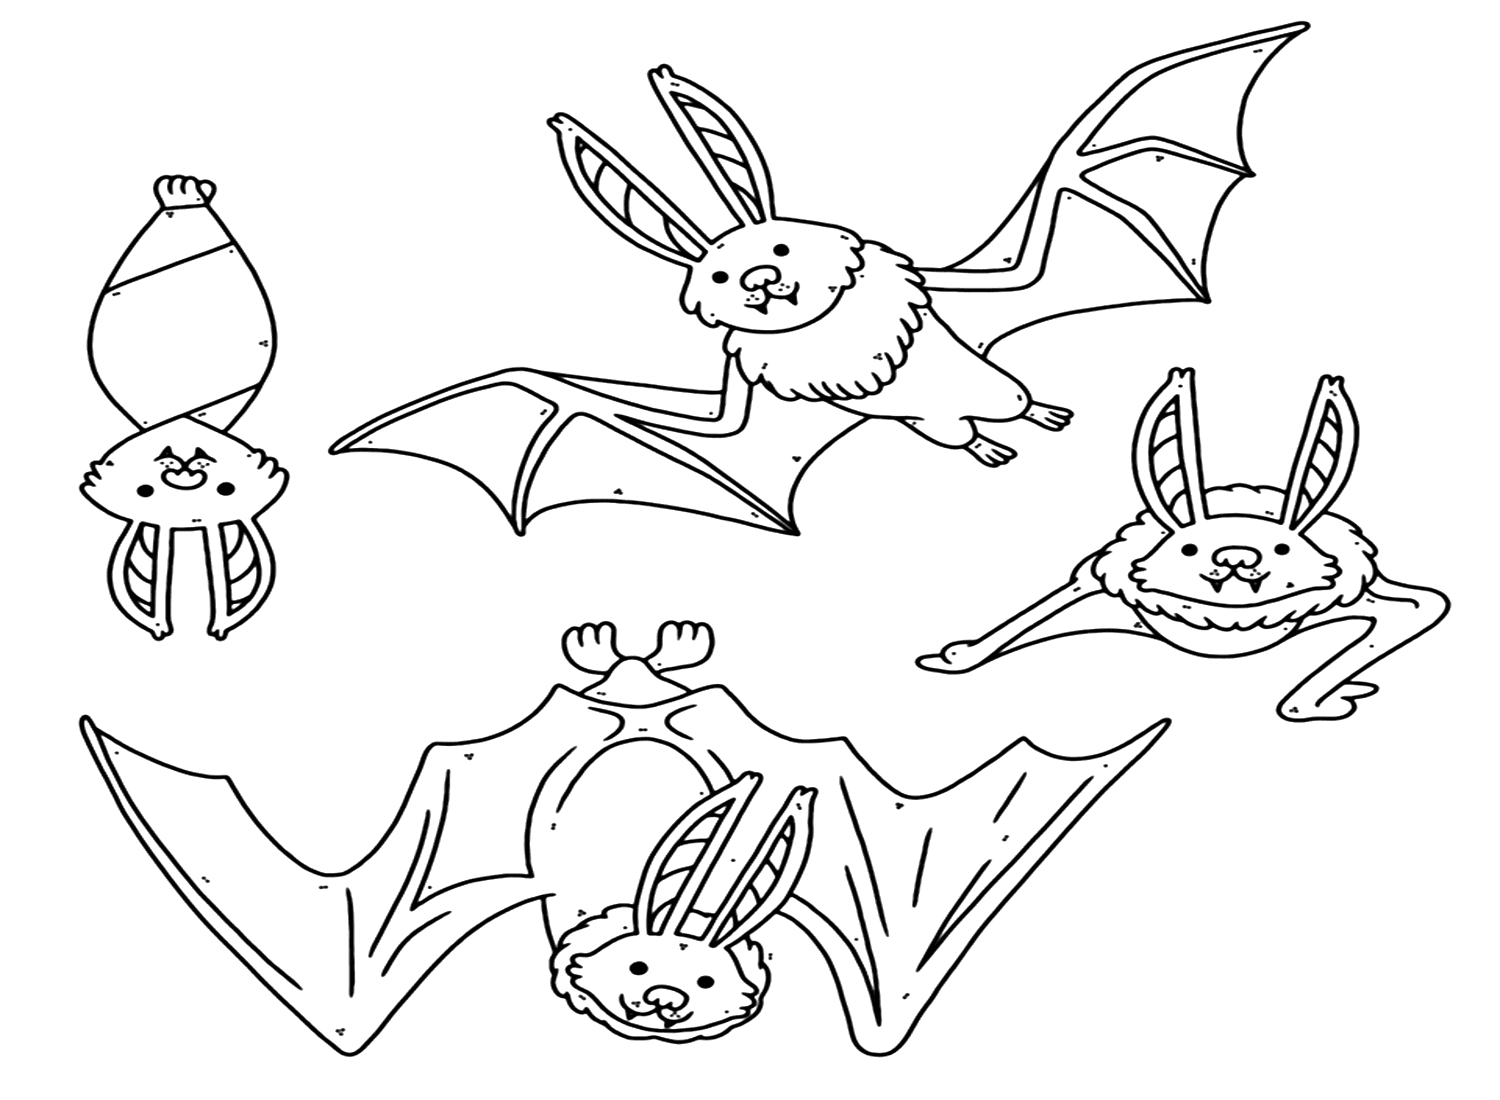 Coloring Pages For Bats from Bat